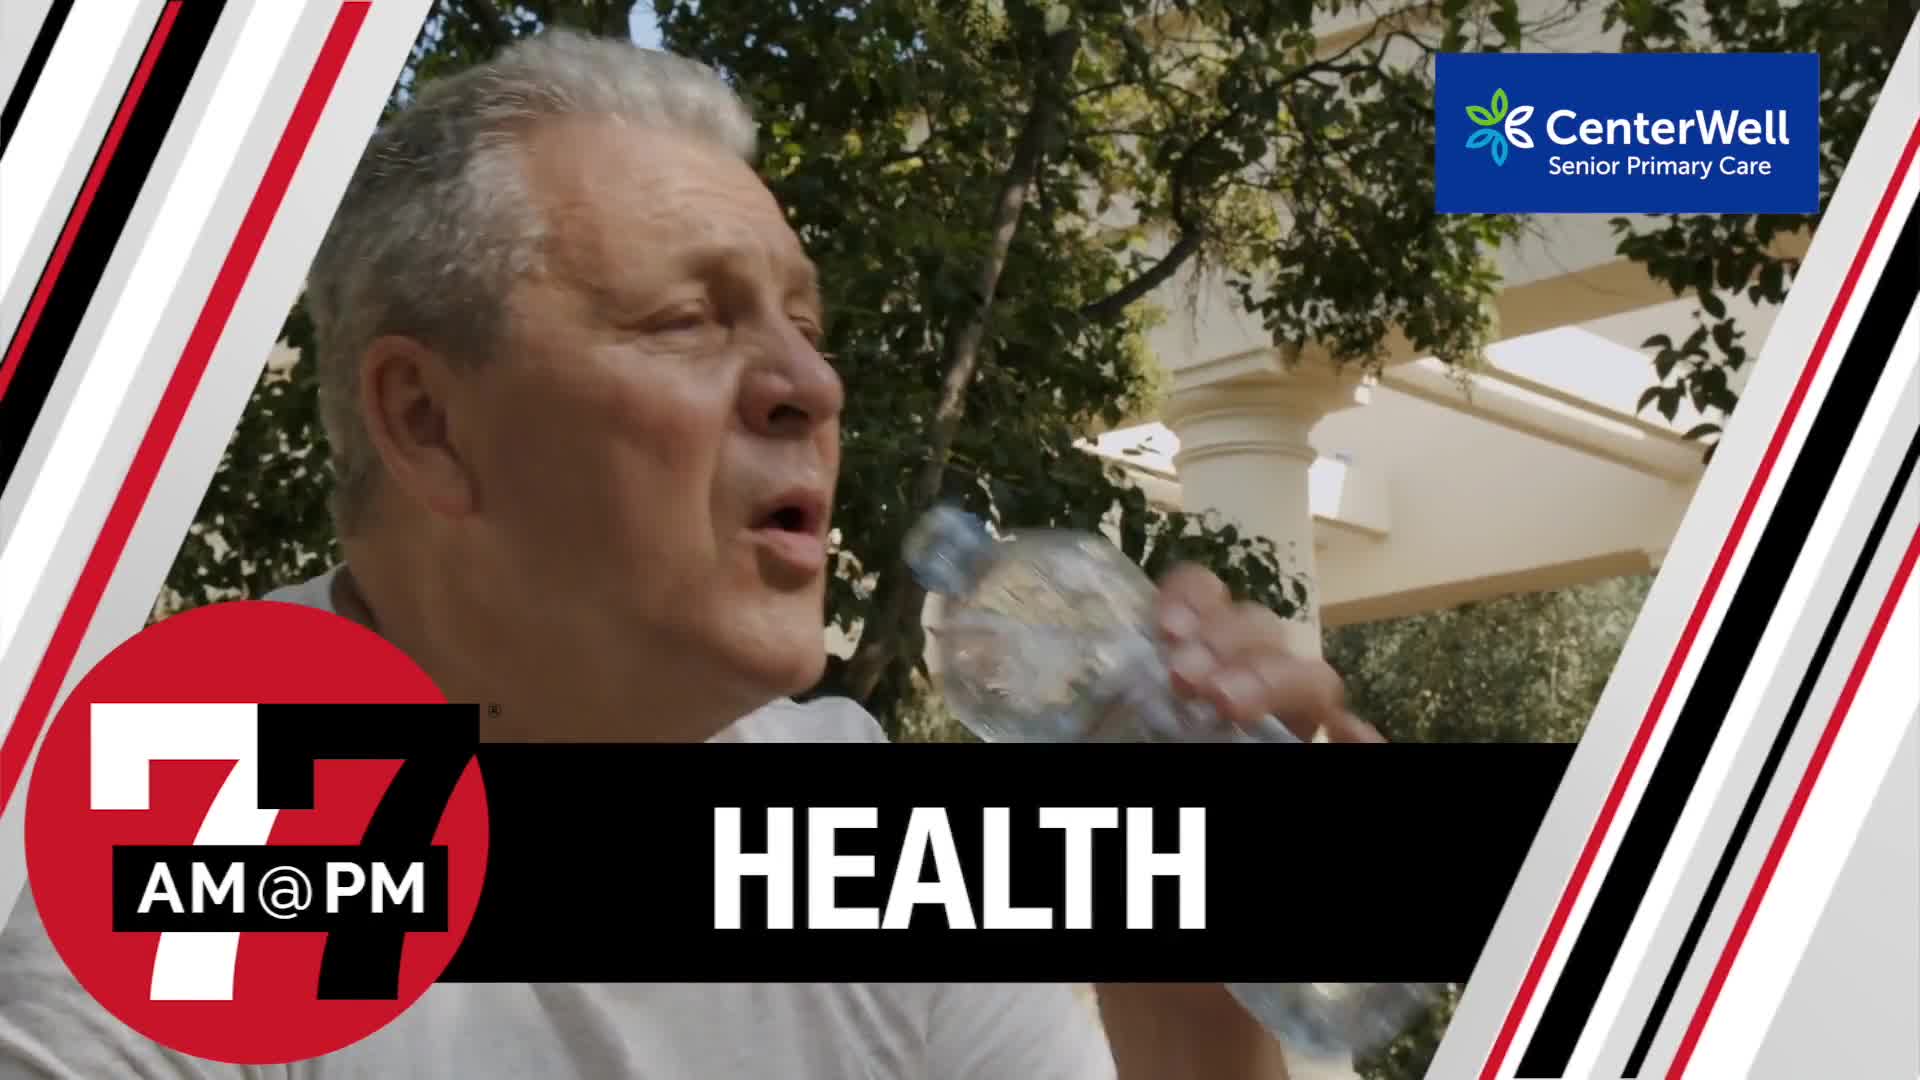 Tips to avoid heat-related health issues